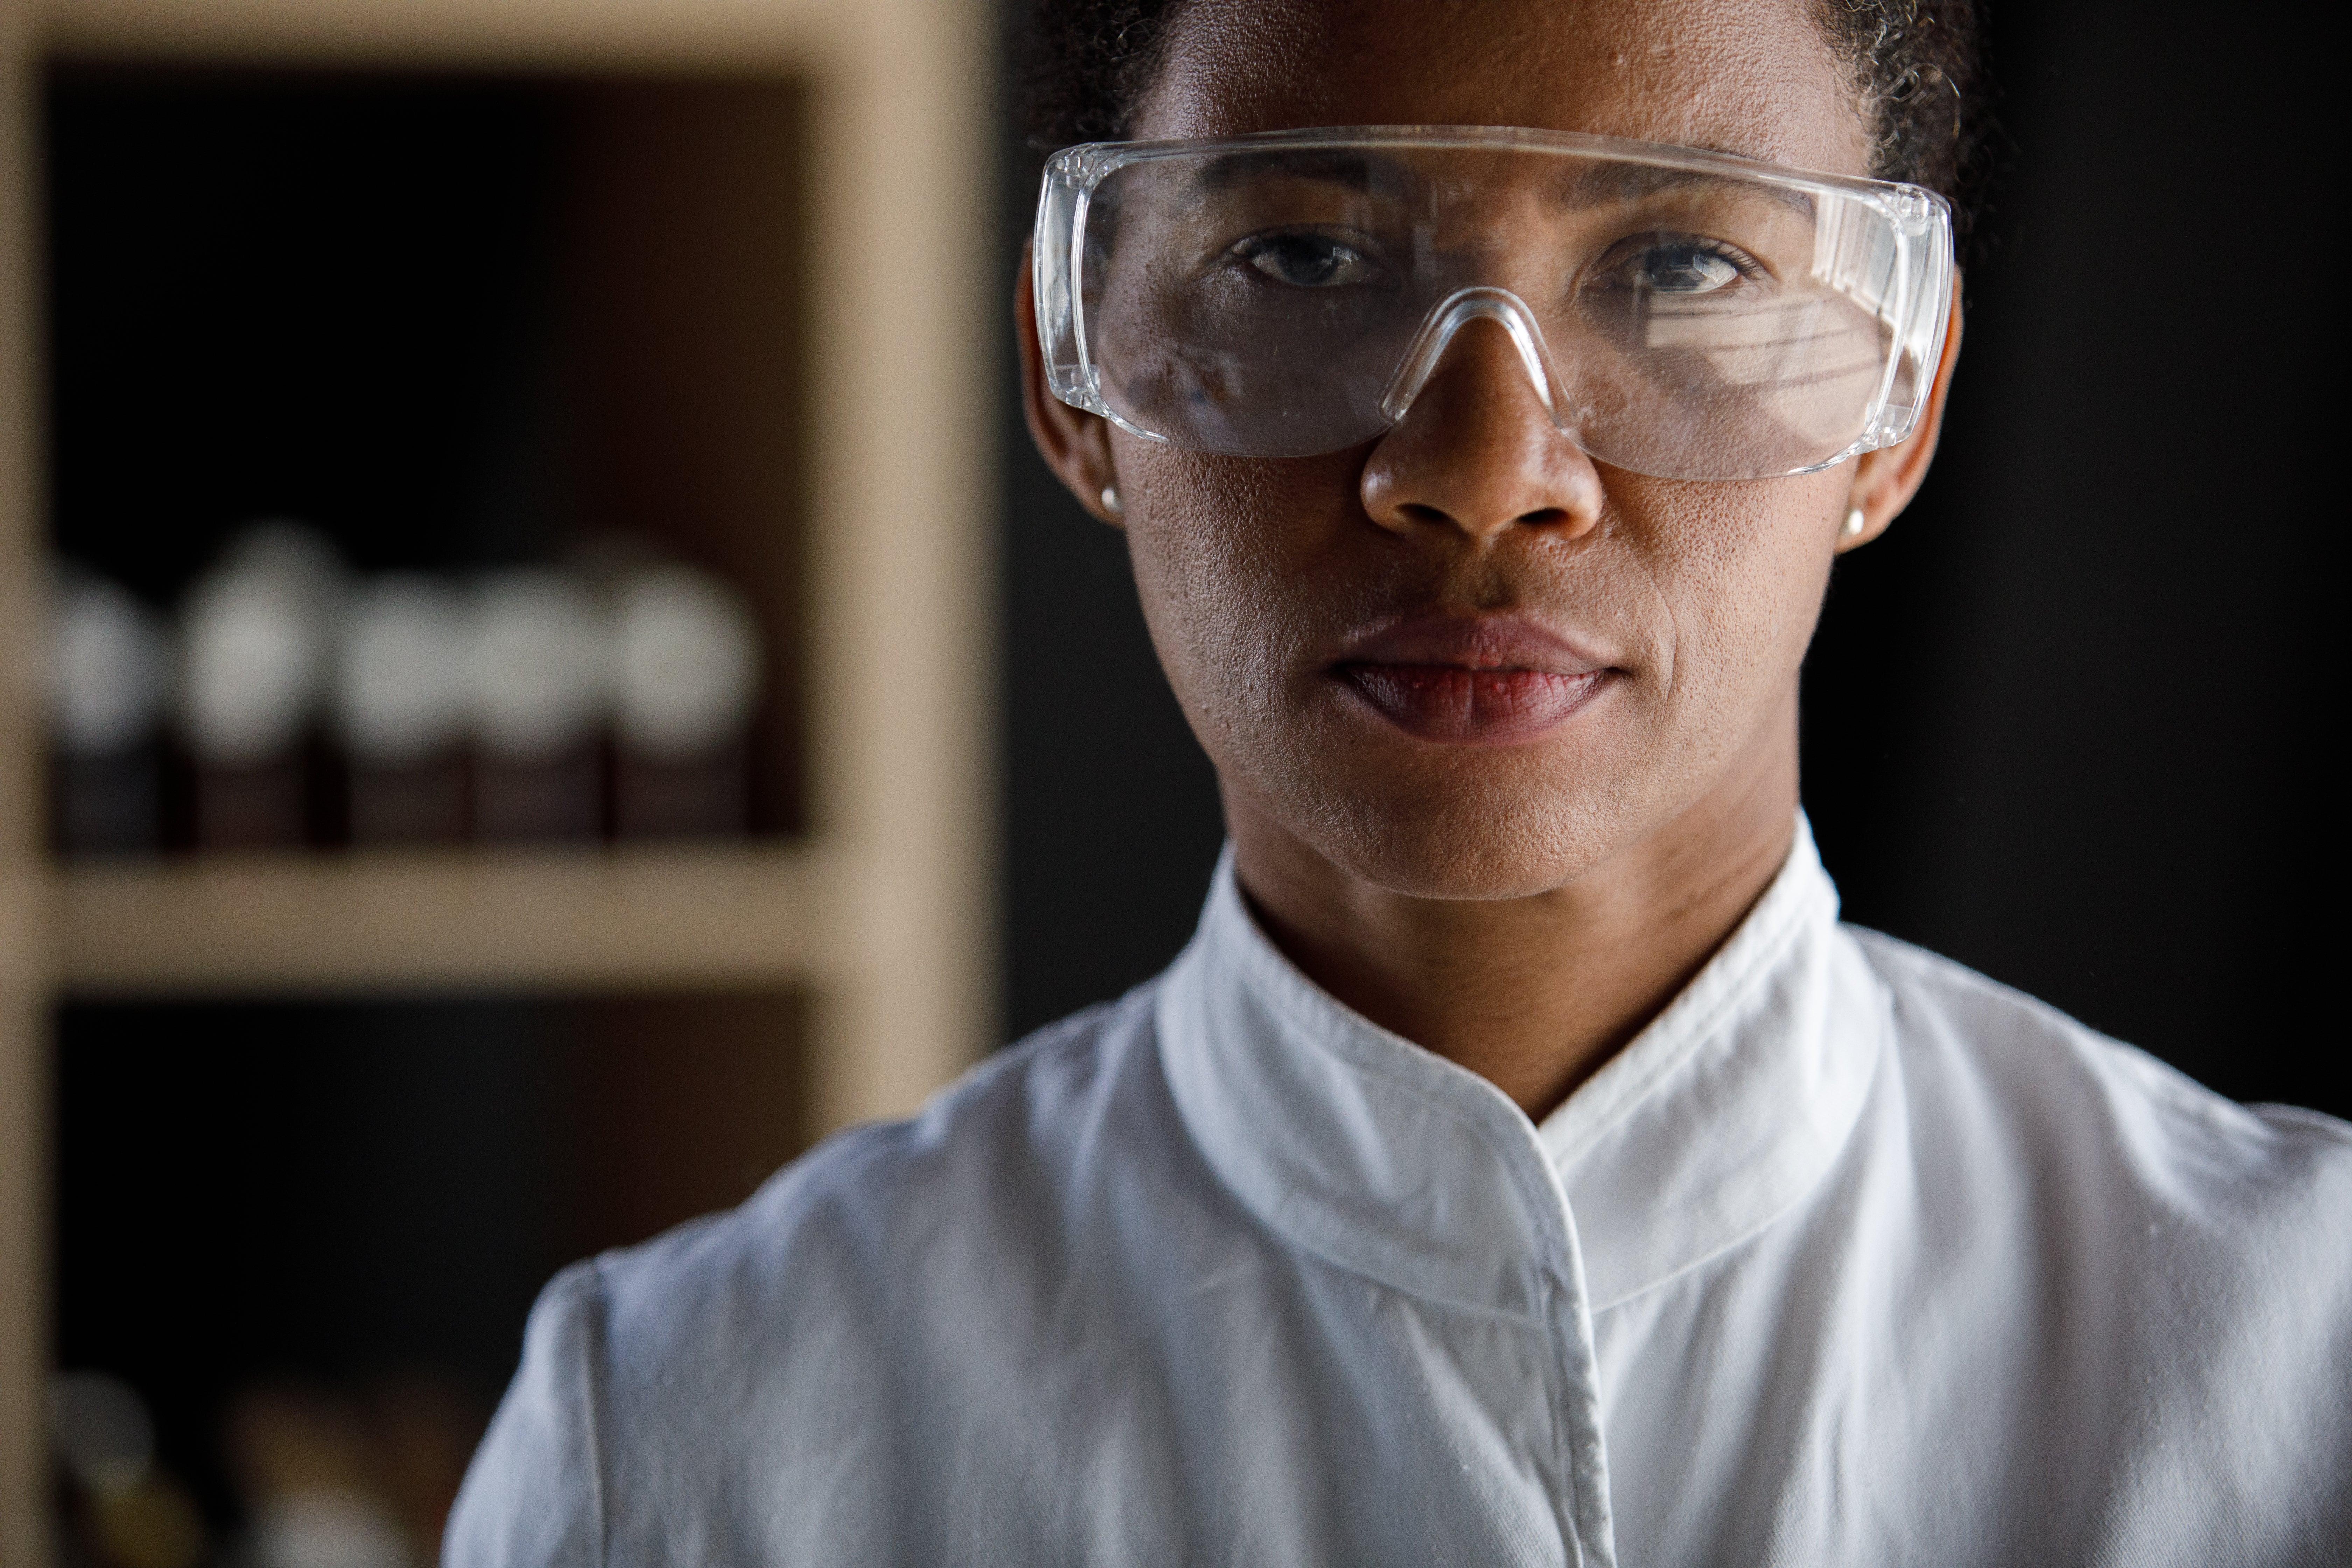 Serious woman of color scientist wearing protective eyewear in white coat.